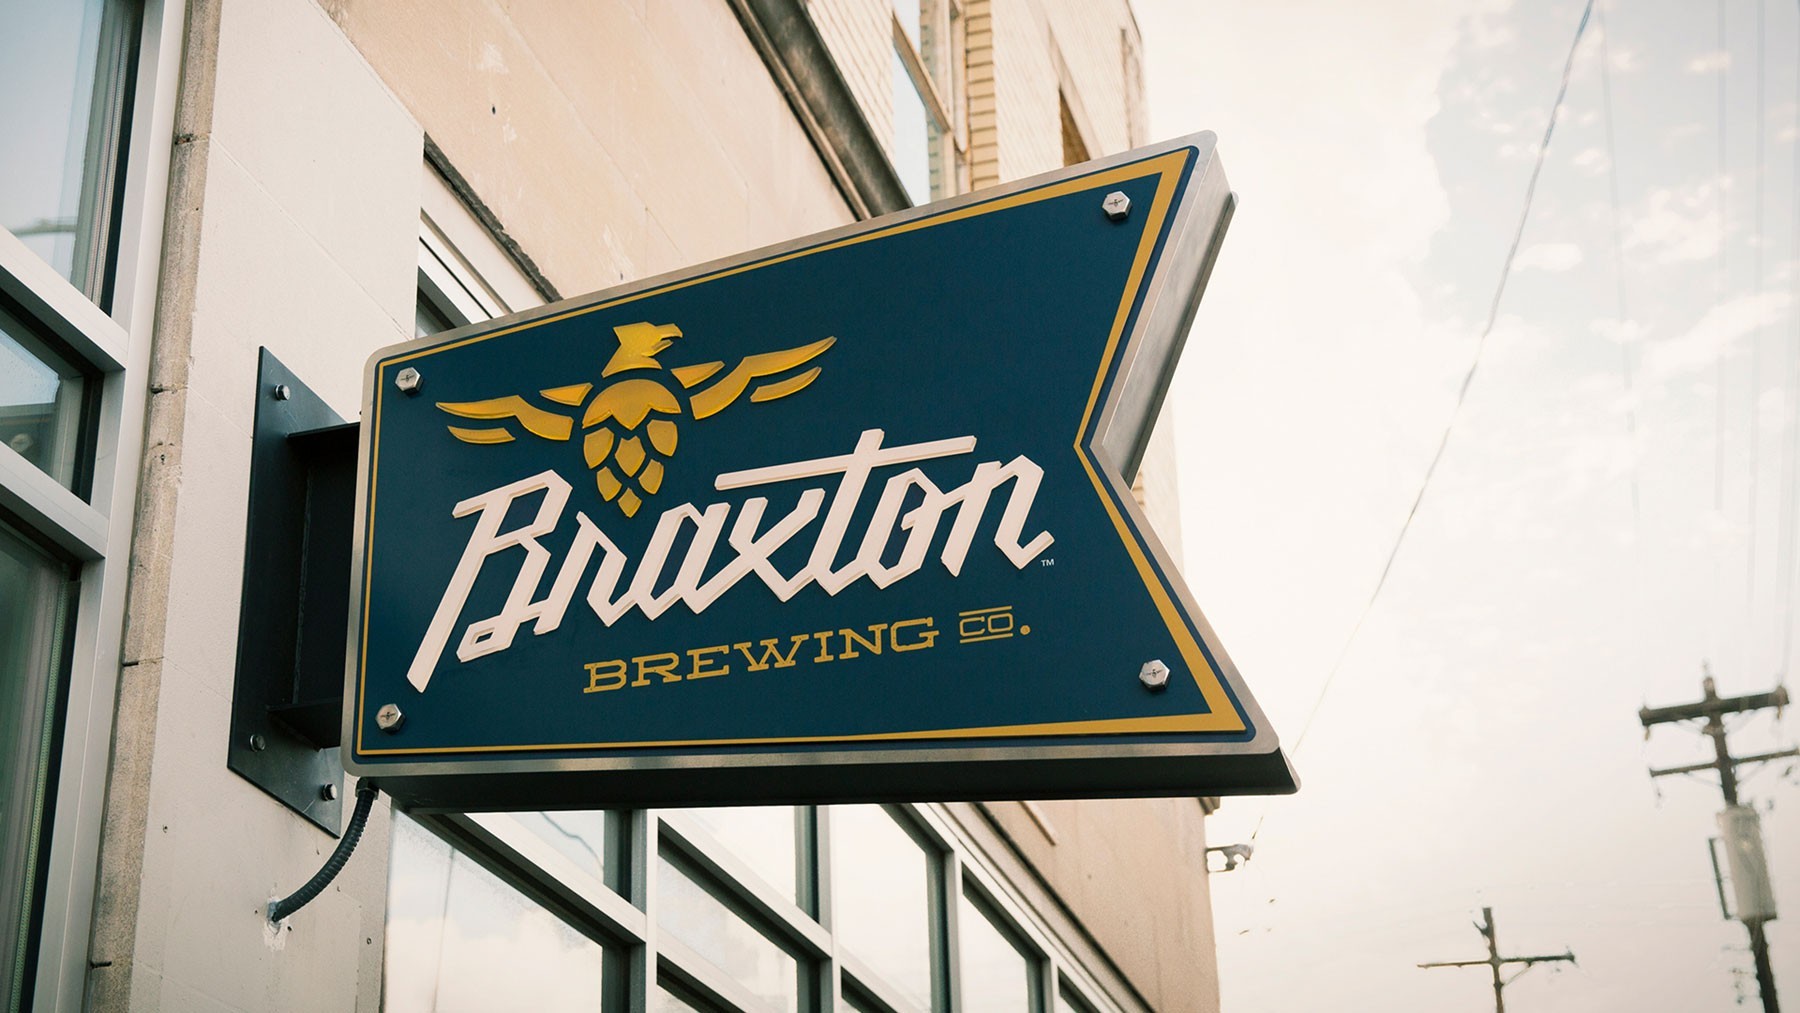 Braxton Brewing Co. Forms Partnership to Continue Expansion of Garage –  Braxton Brewing Company